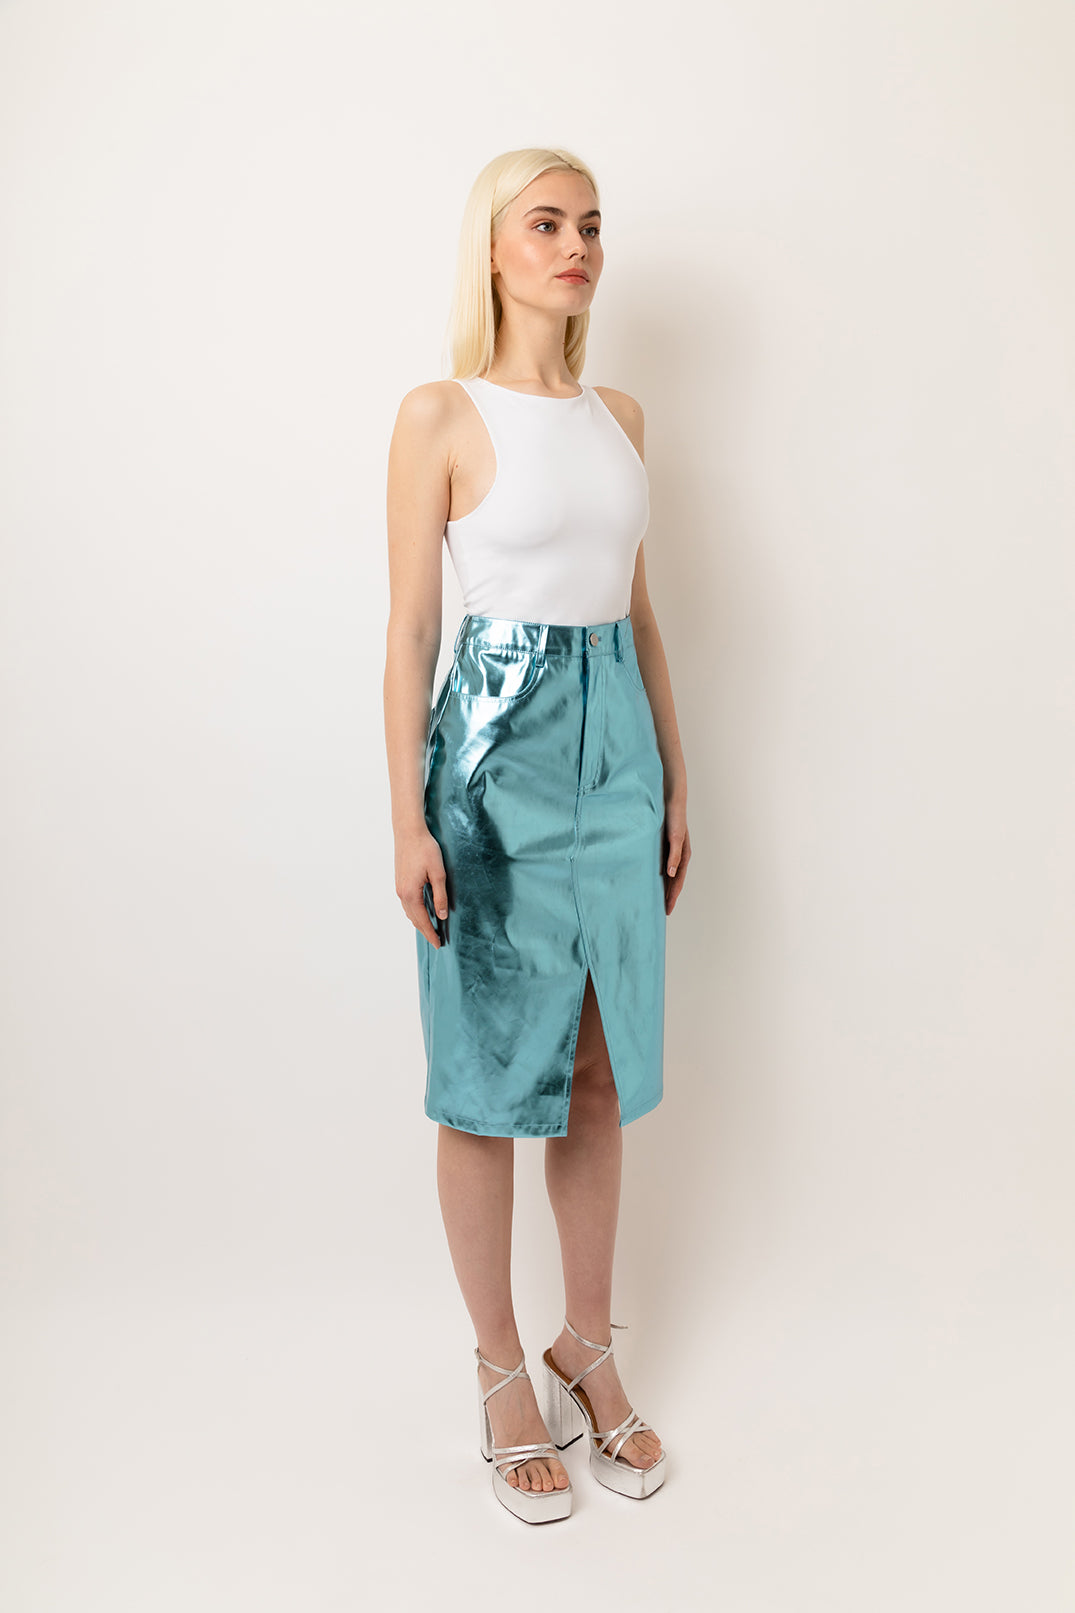 Lupe Shiny Ice Blue High Waisted Metallic Faux Leather Pencil Midi Skirt